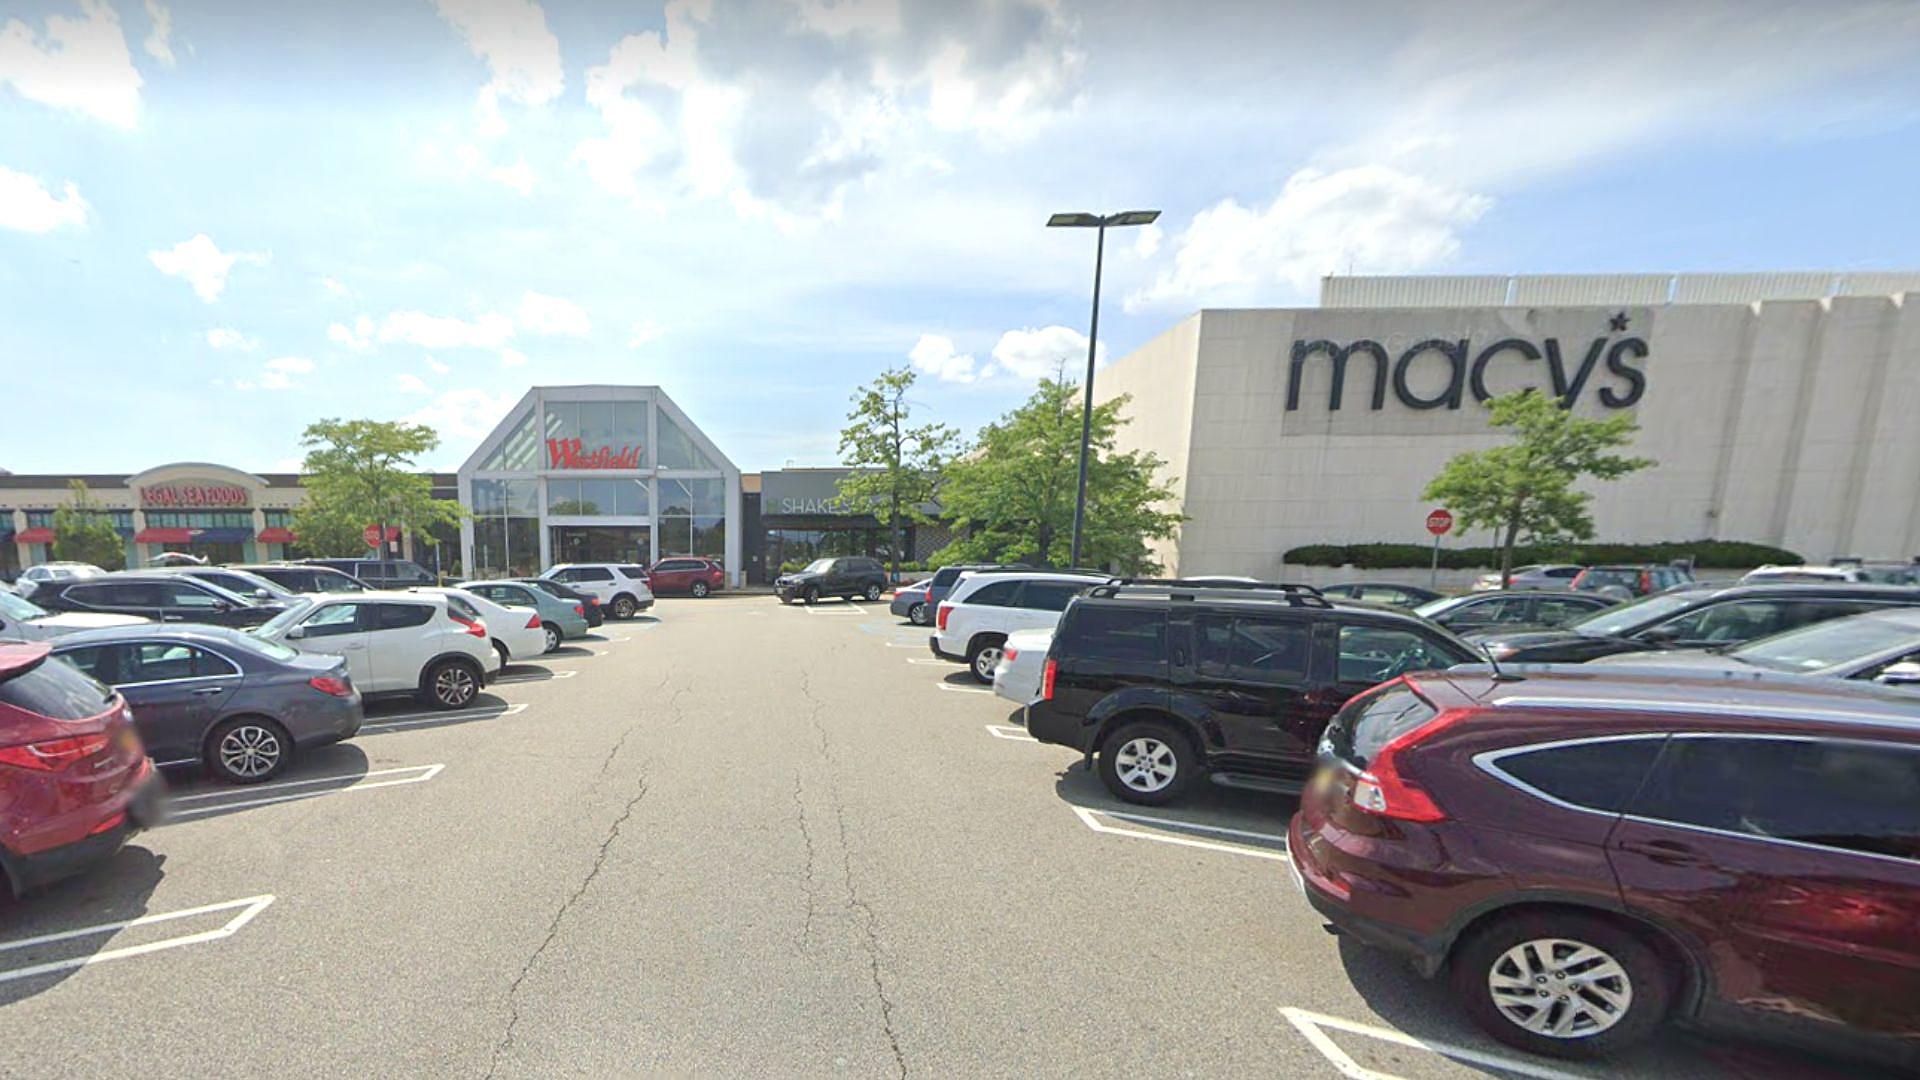 Garden State Plaza Mall to require chaperones for kids under 18